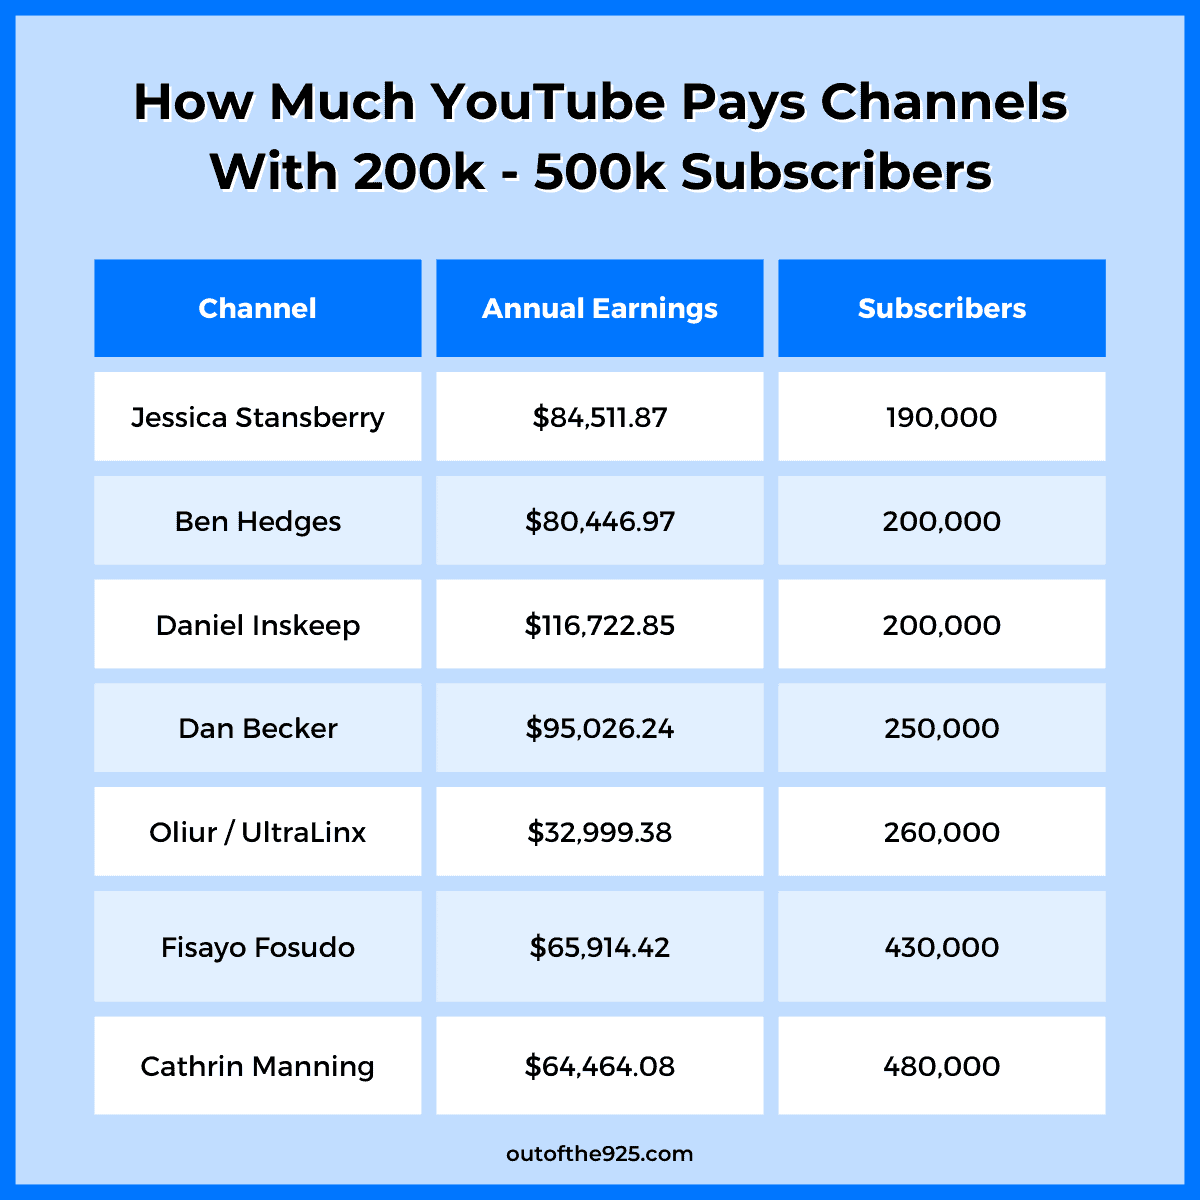 How Much YouTube Pays Channels With 200k - 500k Subscribers